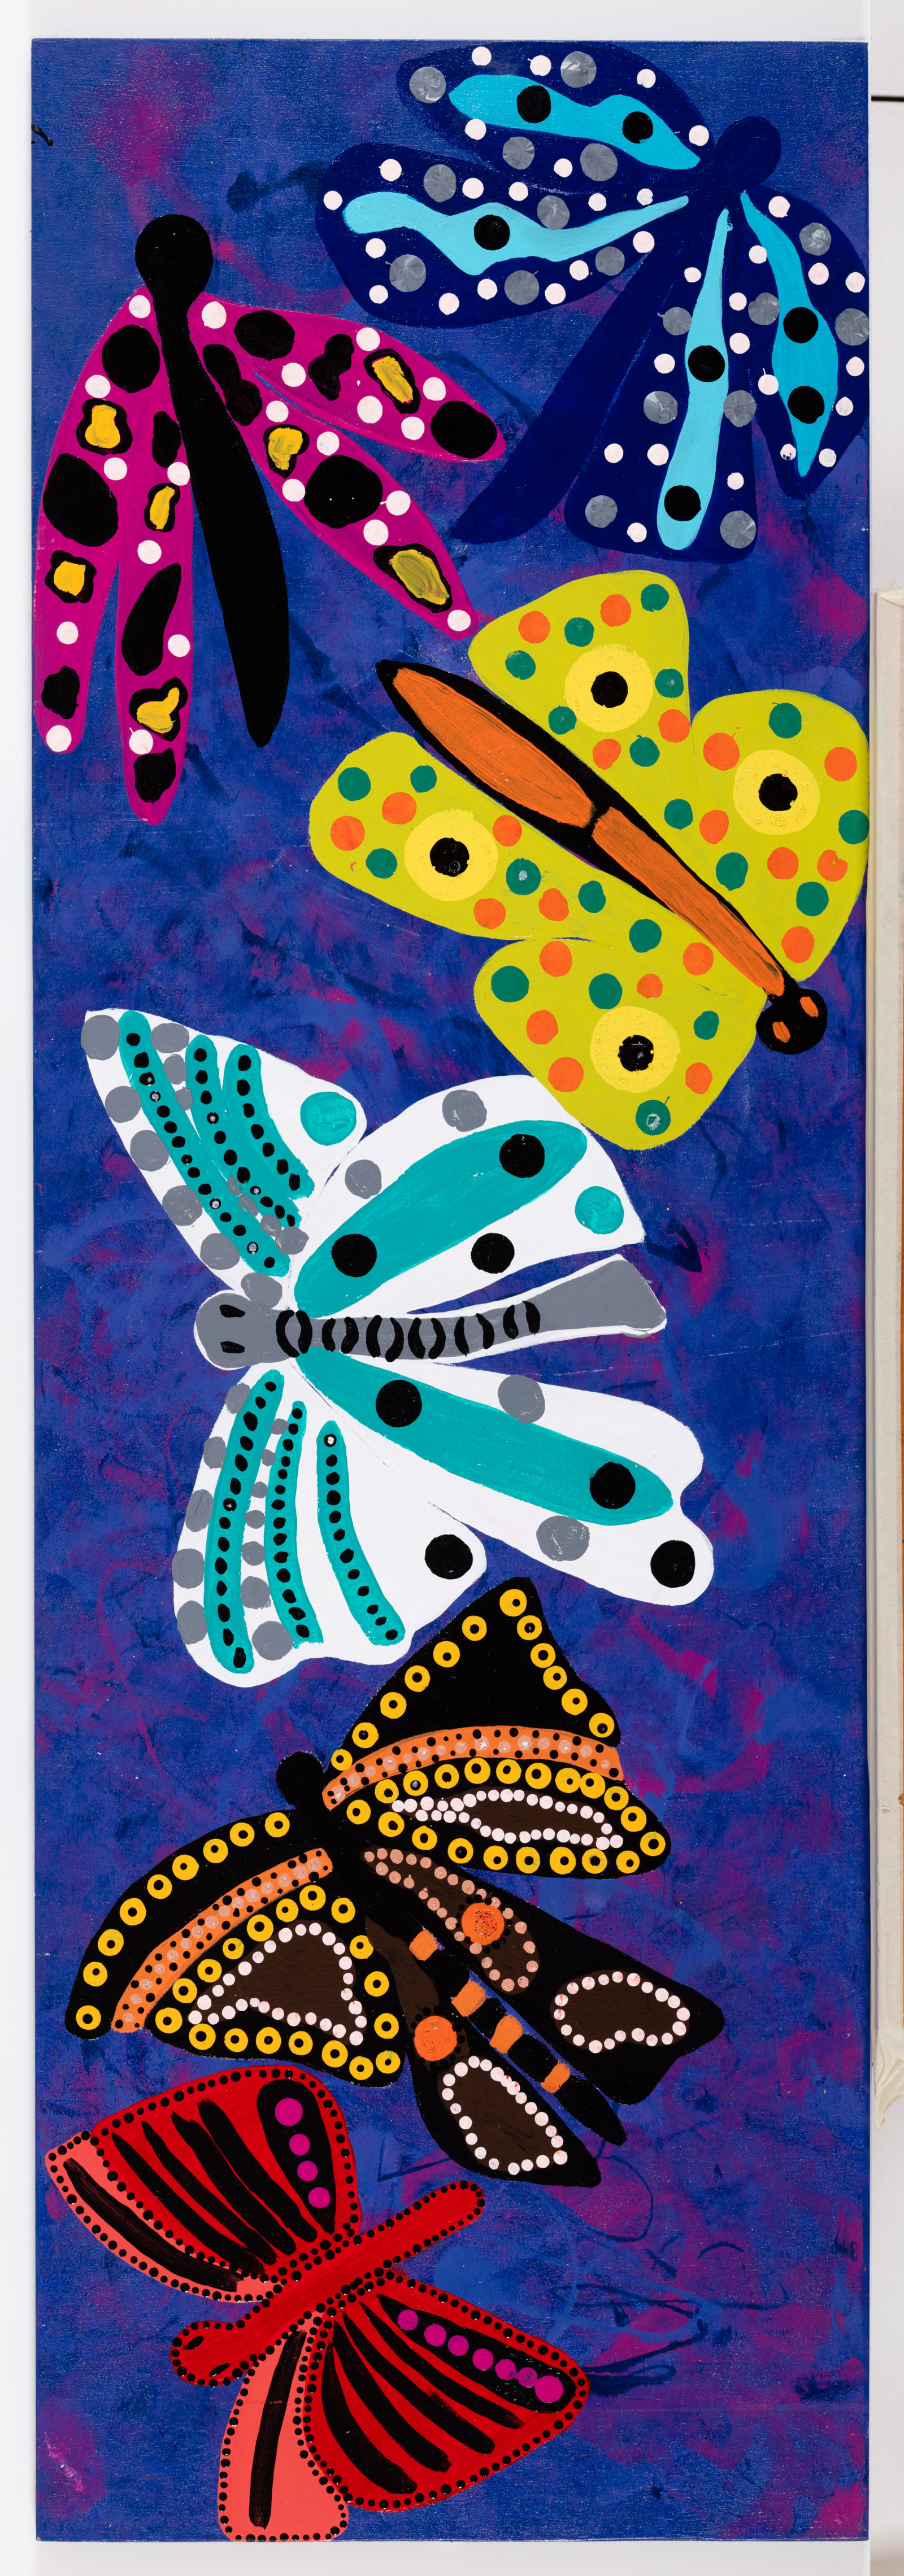 Butterflies, Lorraine Brown and Narelle Thomas, 2022, acrylic on plywood board, 122.5cm x 41cm
We connect our butterflies now with one of the local Dreaming Stories ‘Birth Of The Butterflies’. We have created the beautiful colours of ‘The Butterfly Dreaming Story'.